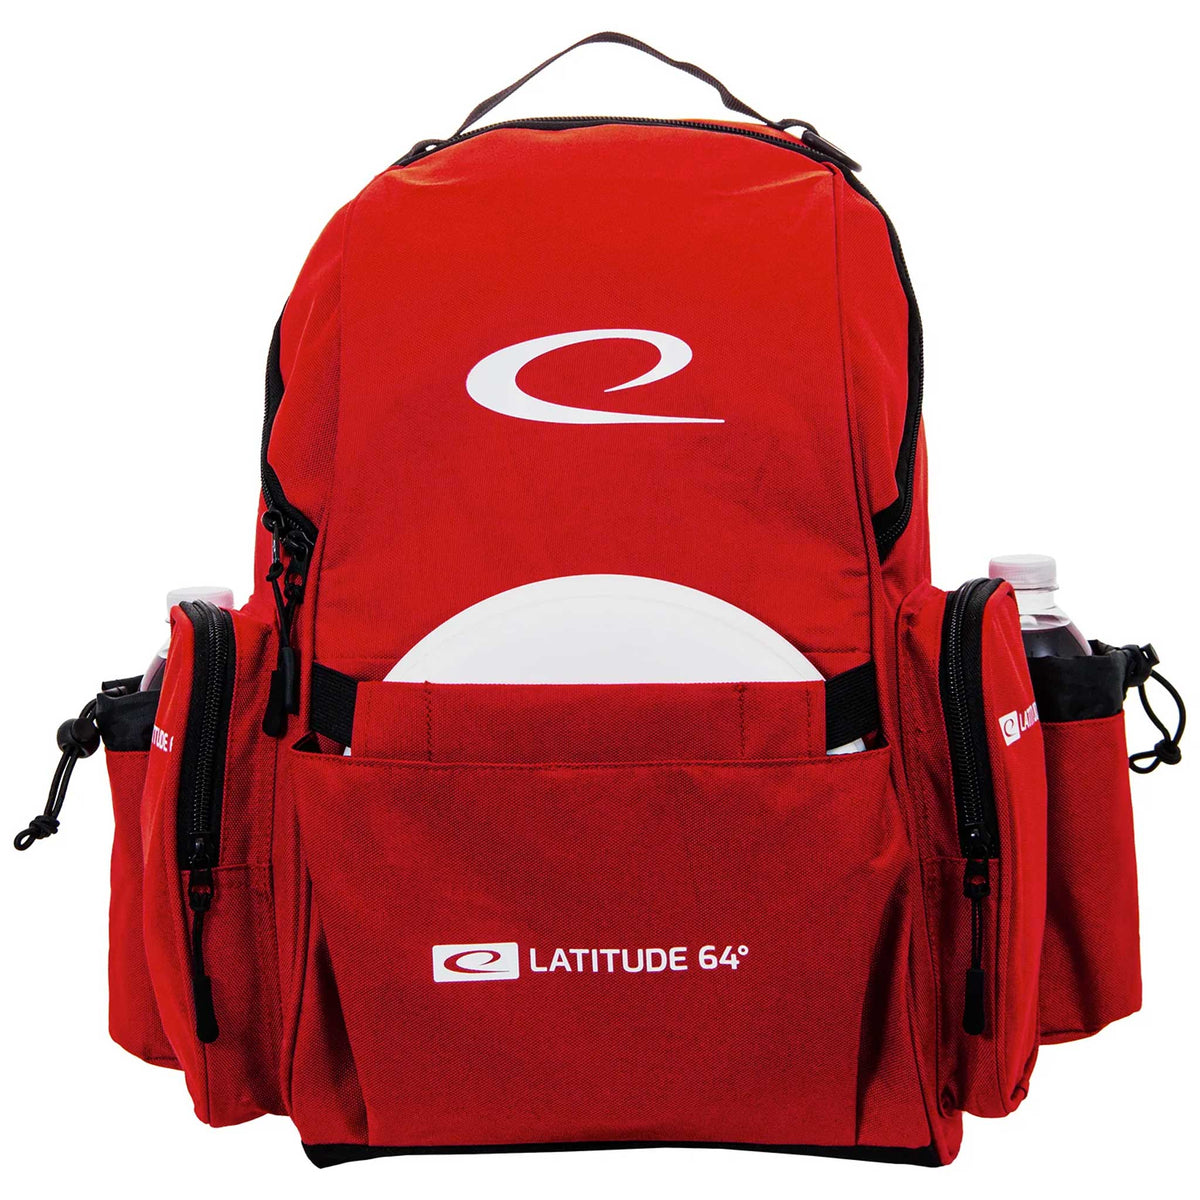 Latitude 64 Swift Disc Golf Backpack - Rave Red